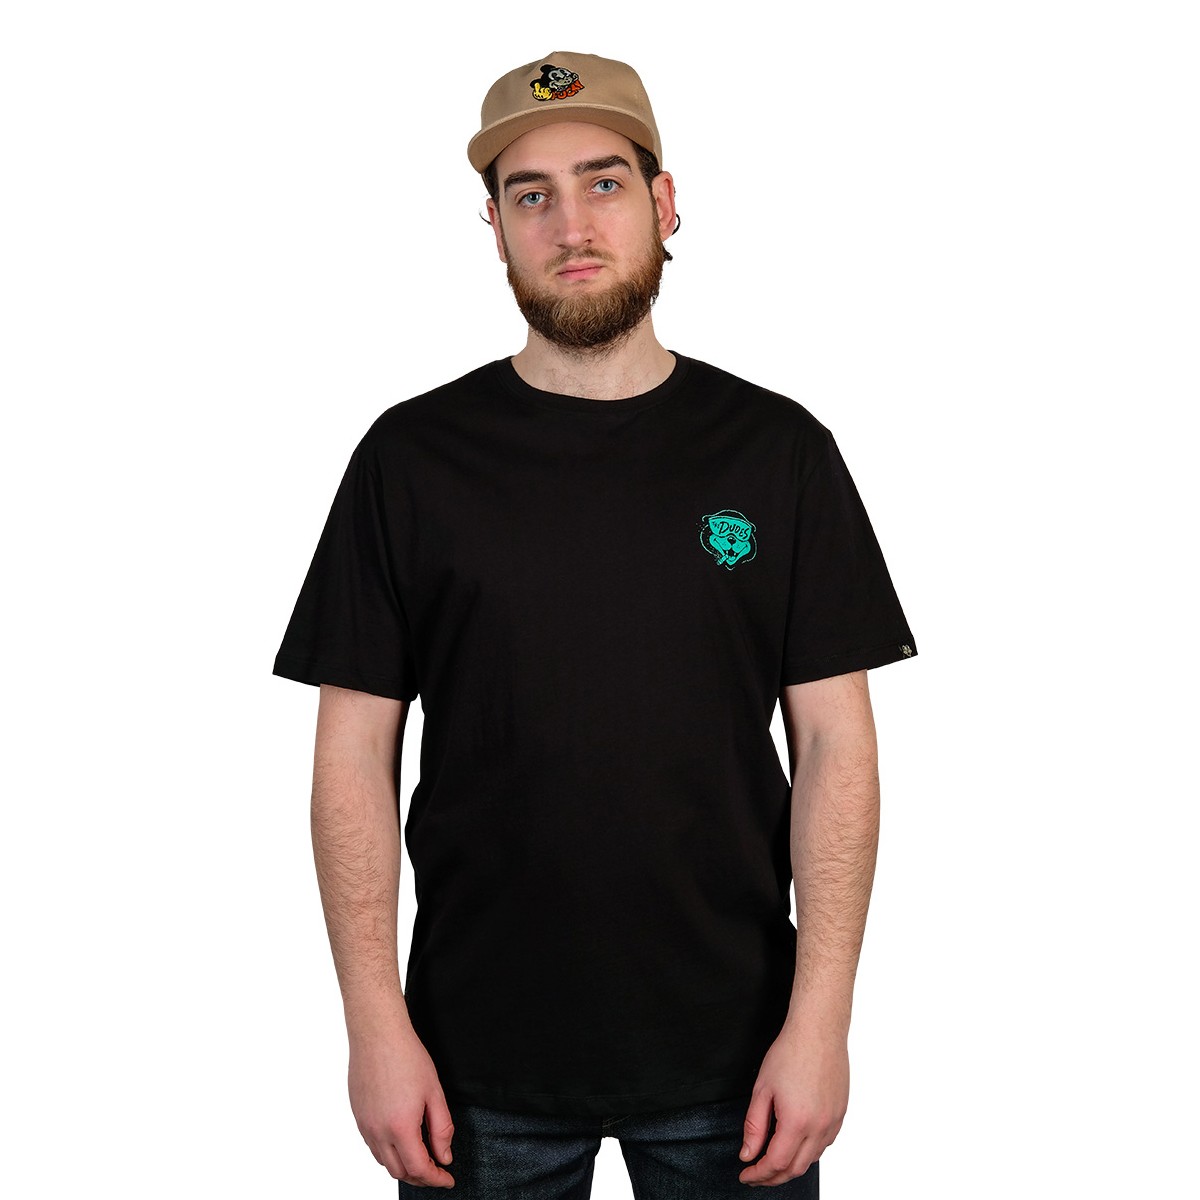 The Dudes Game Over Black T-Shirt 1005002